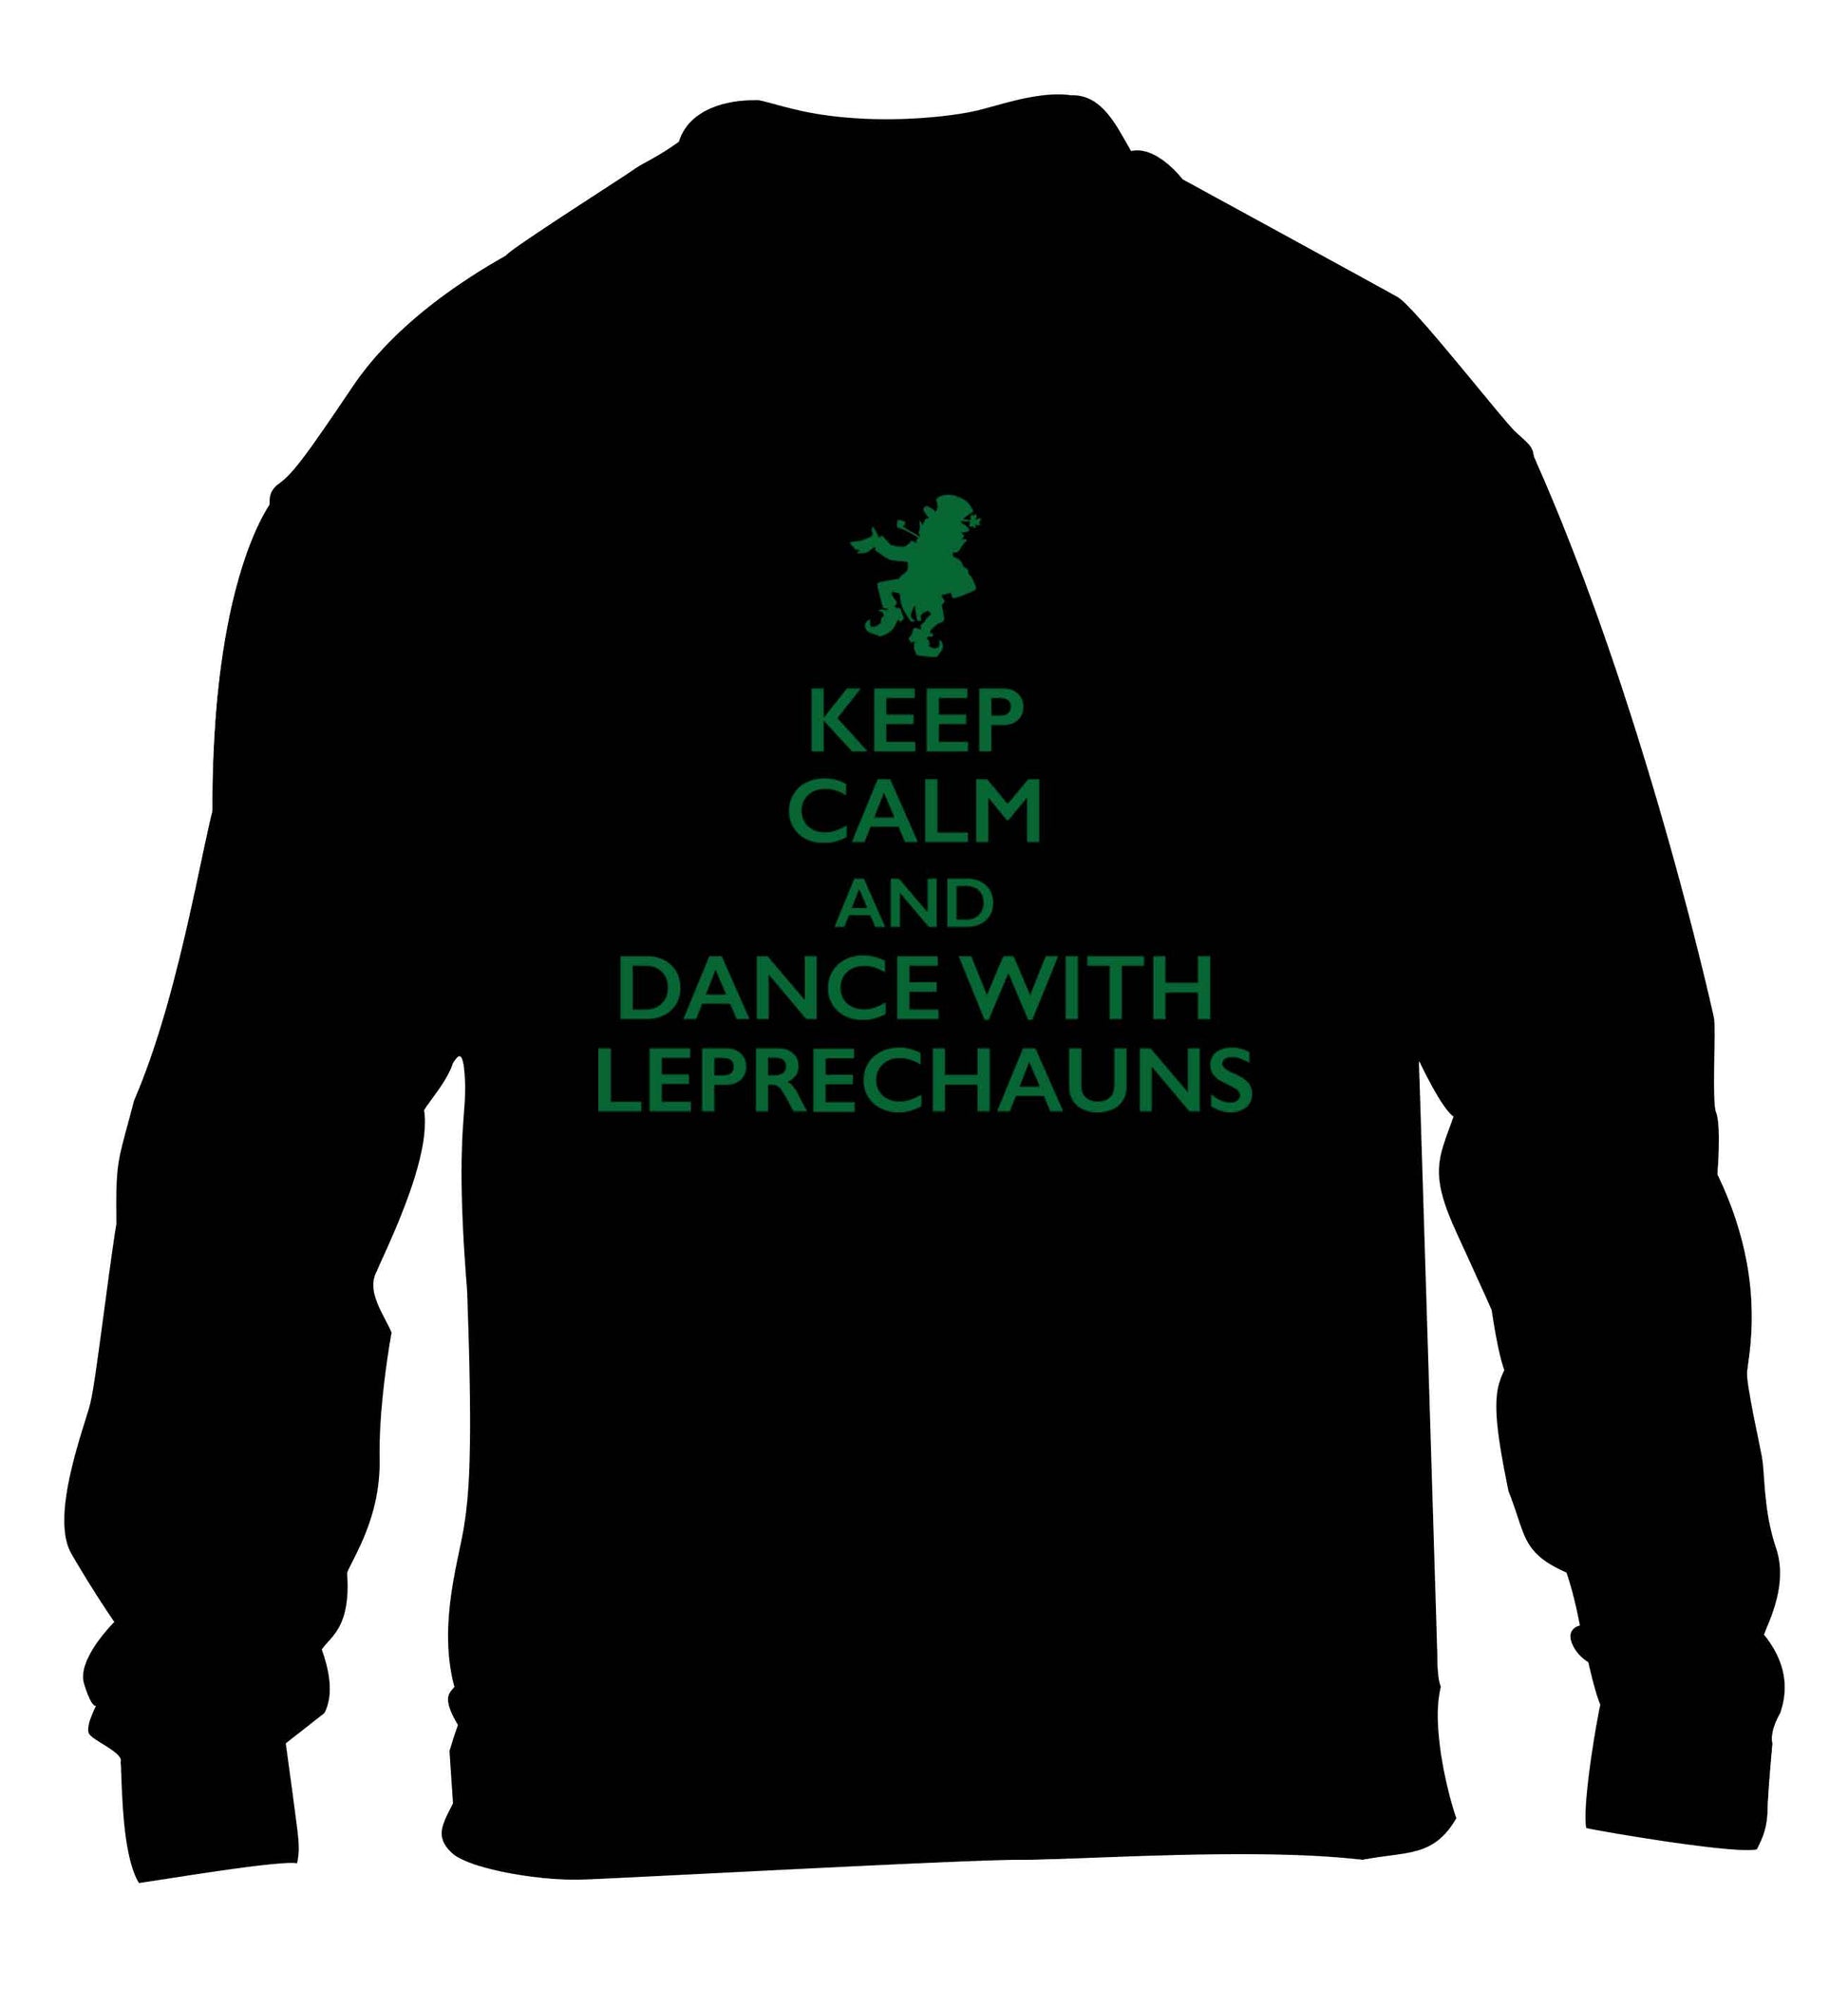 Keep calm and dance with leprechauns children's black sweater 12-13 Years